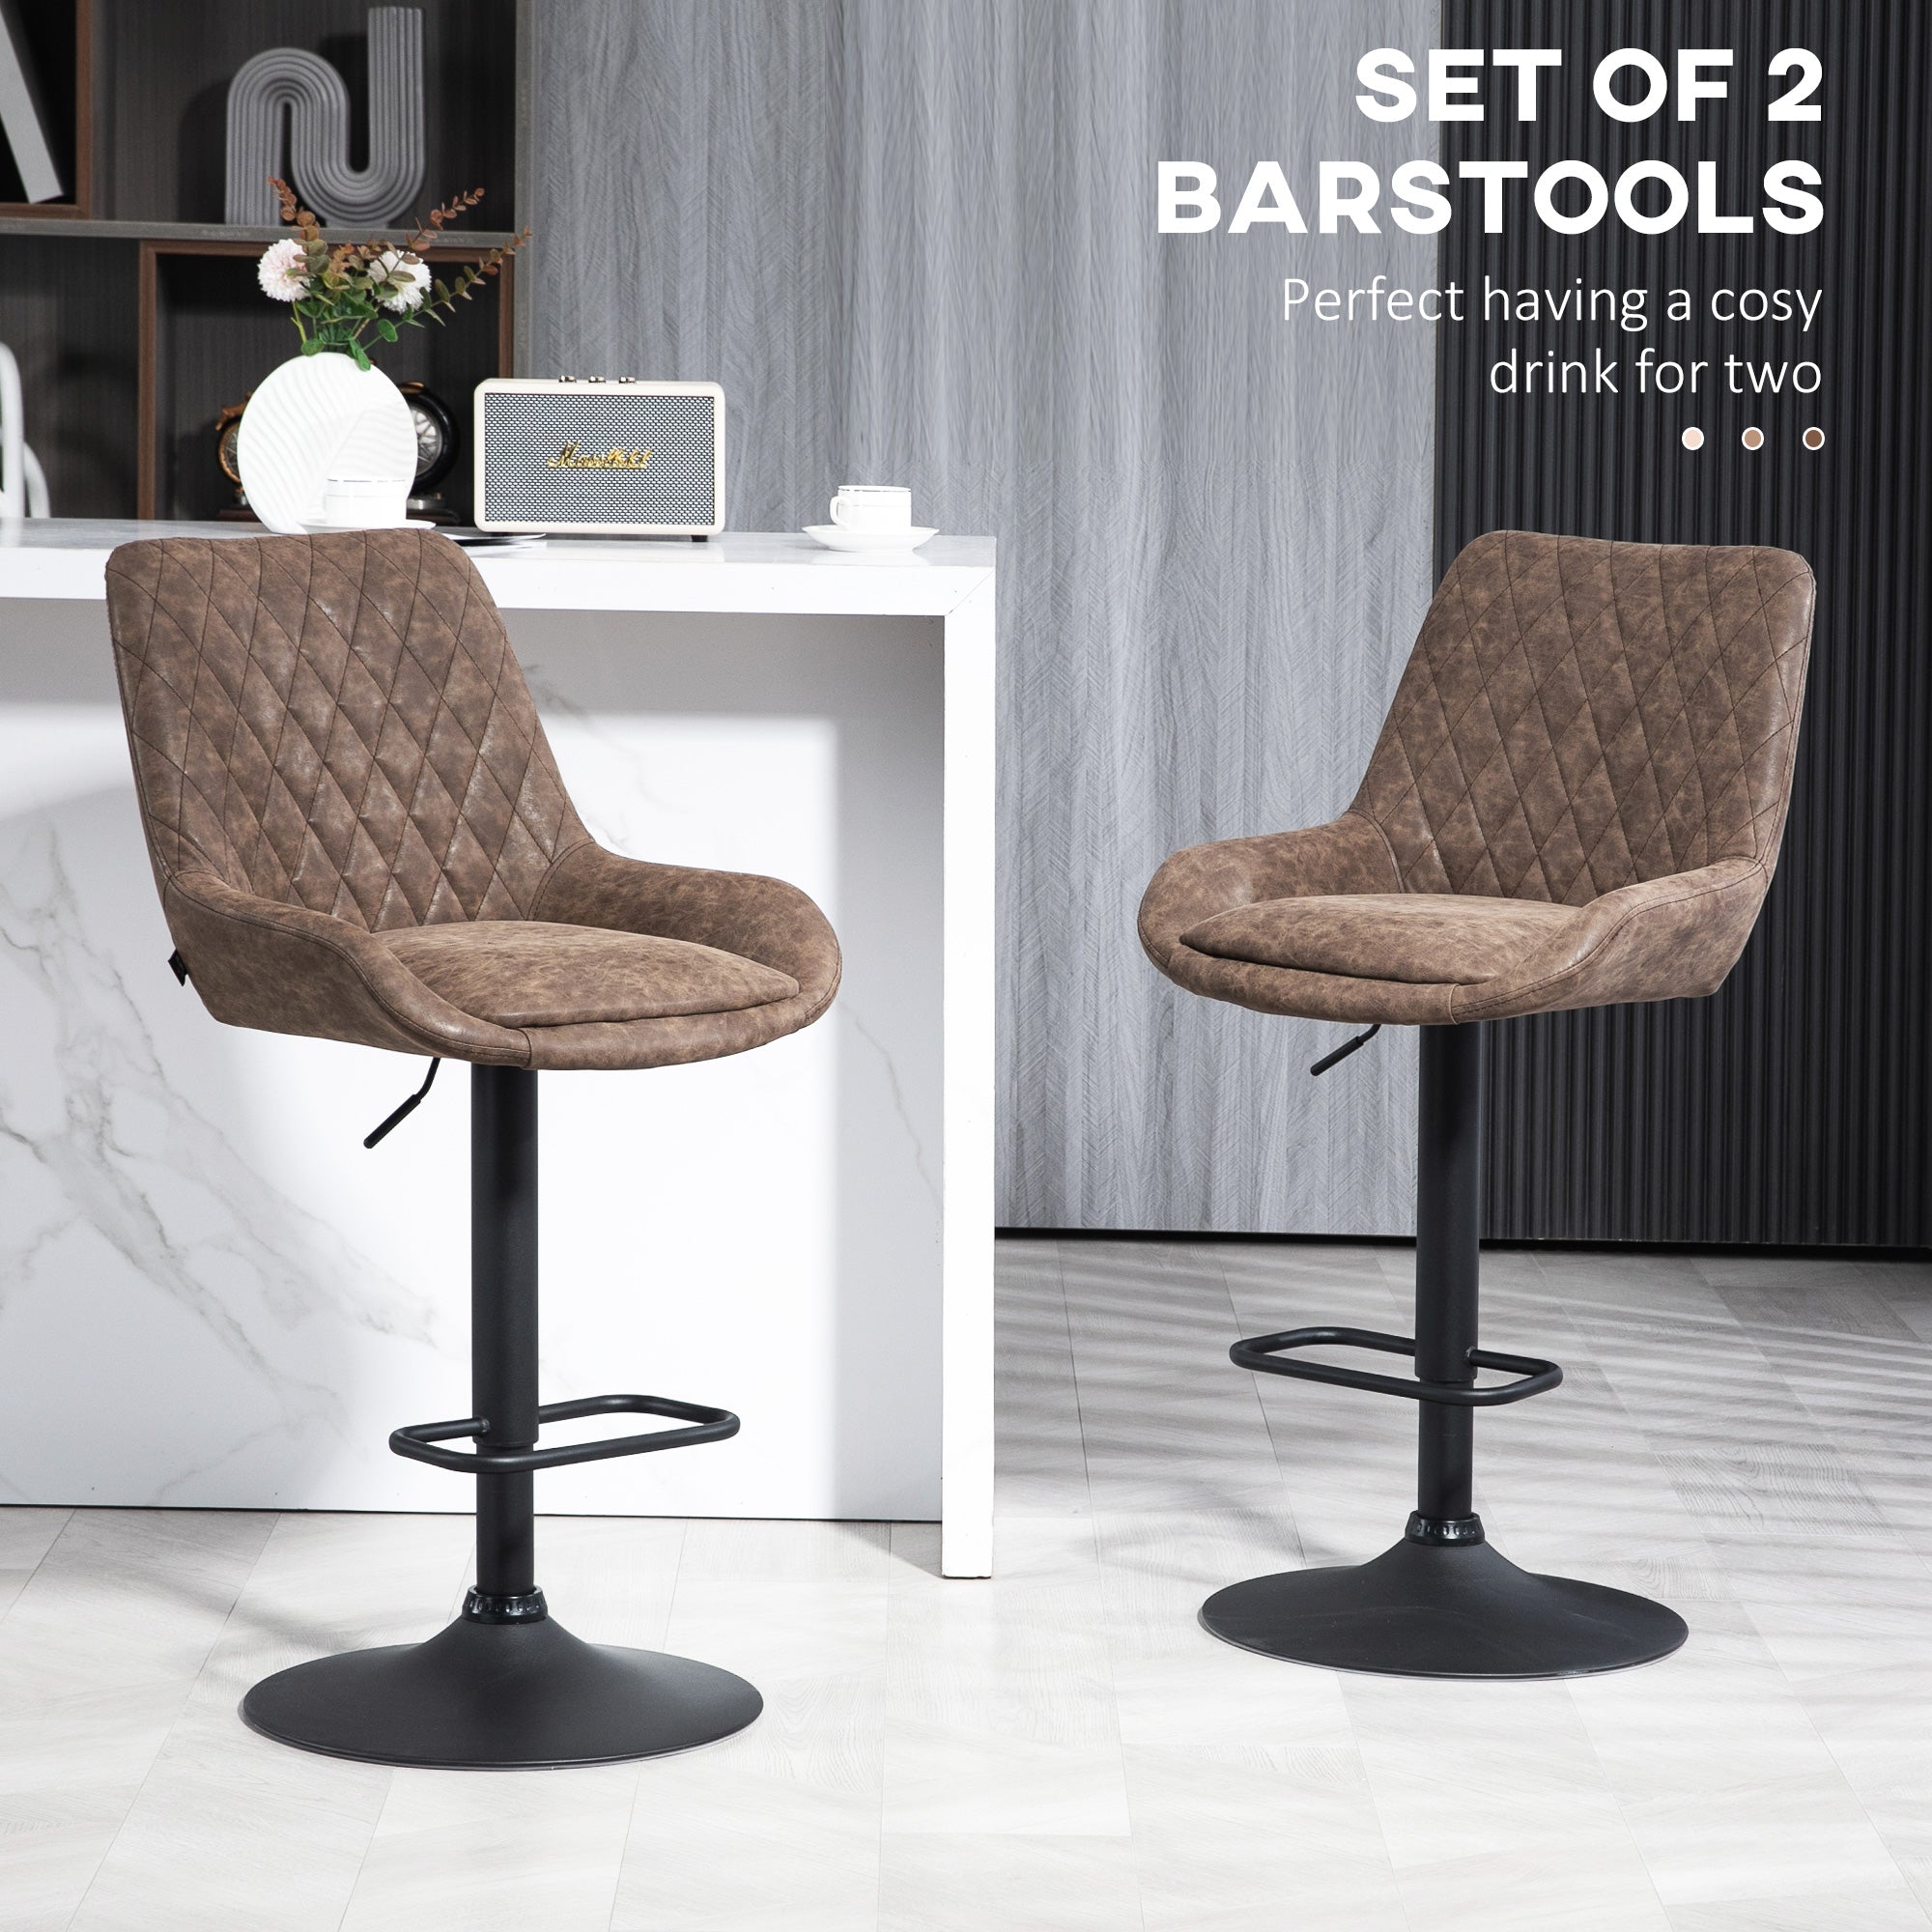 Retro Bar Stools Set of 2, Adjustable Kitchen Stool, Upholstered Bar Chairs with Back, Swivel Seat, Coffee  AOSOM   